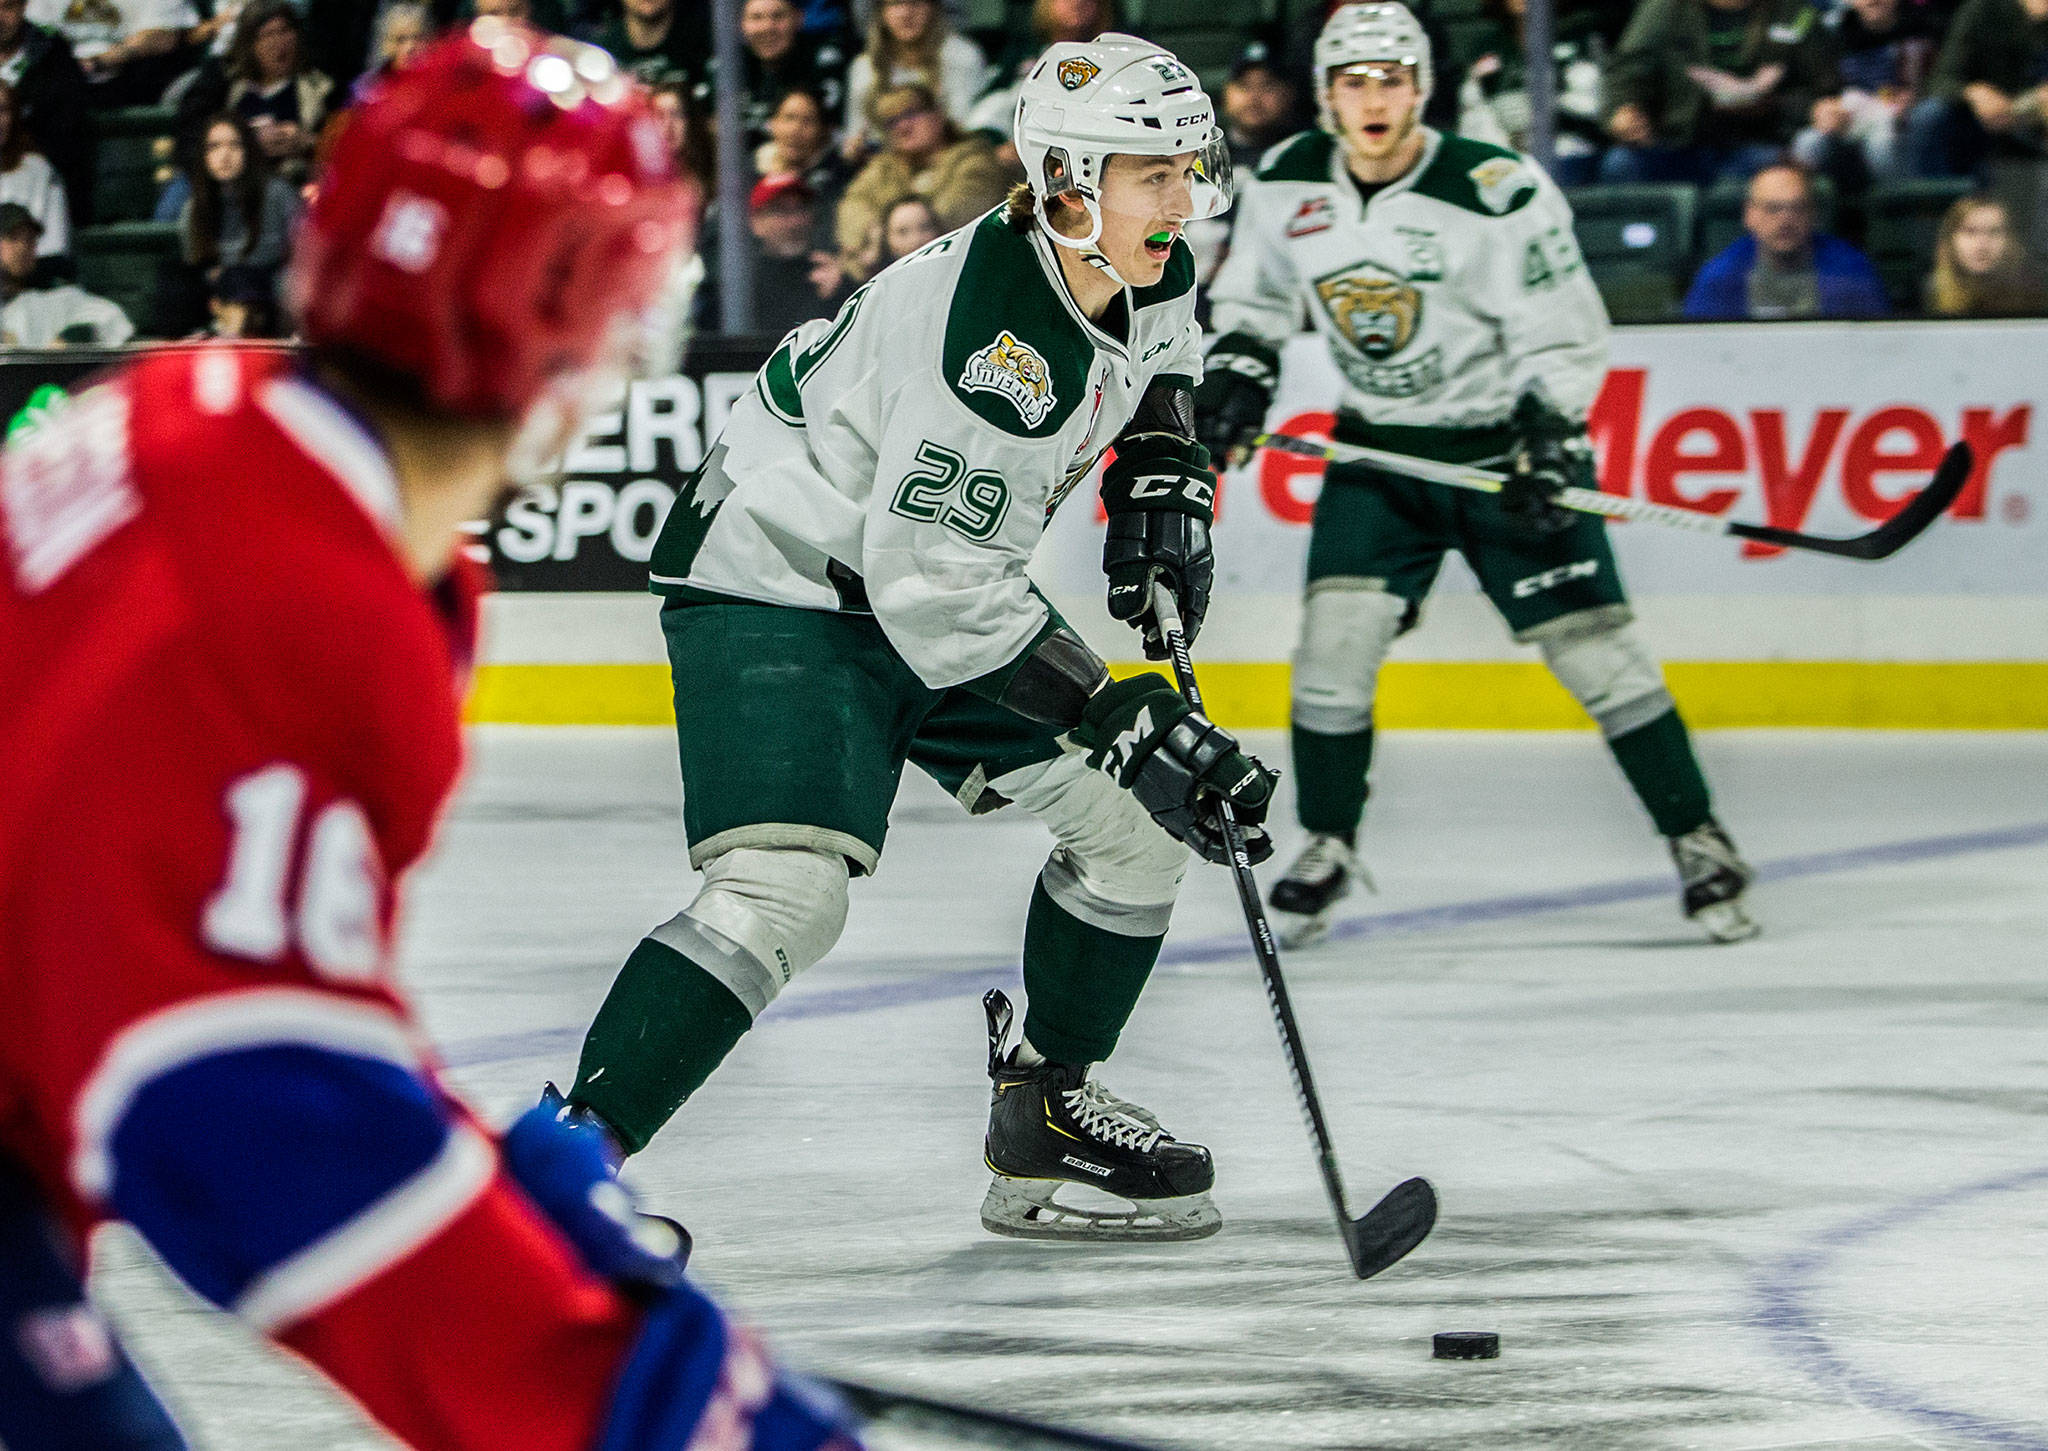 Silvertips’ Wyatte Wylie skates with the puck during the game against the Spokane Chiefs on Sunday, April 7, 2019 in Everett, Wash. (Olivia Vanni / The Herald)